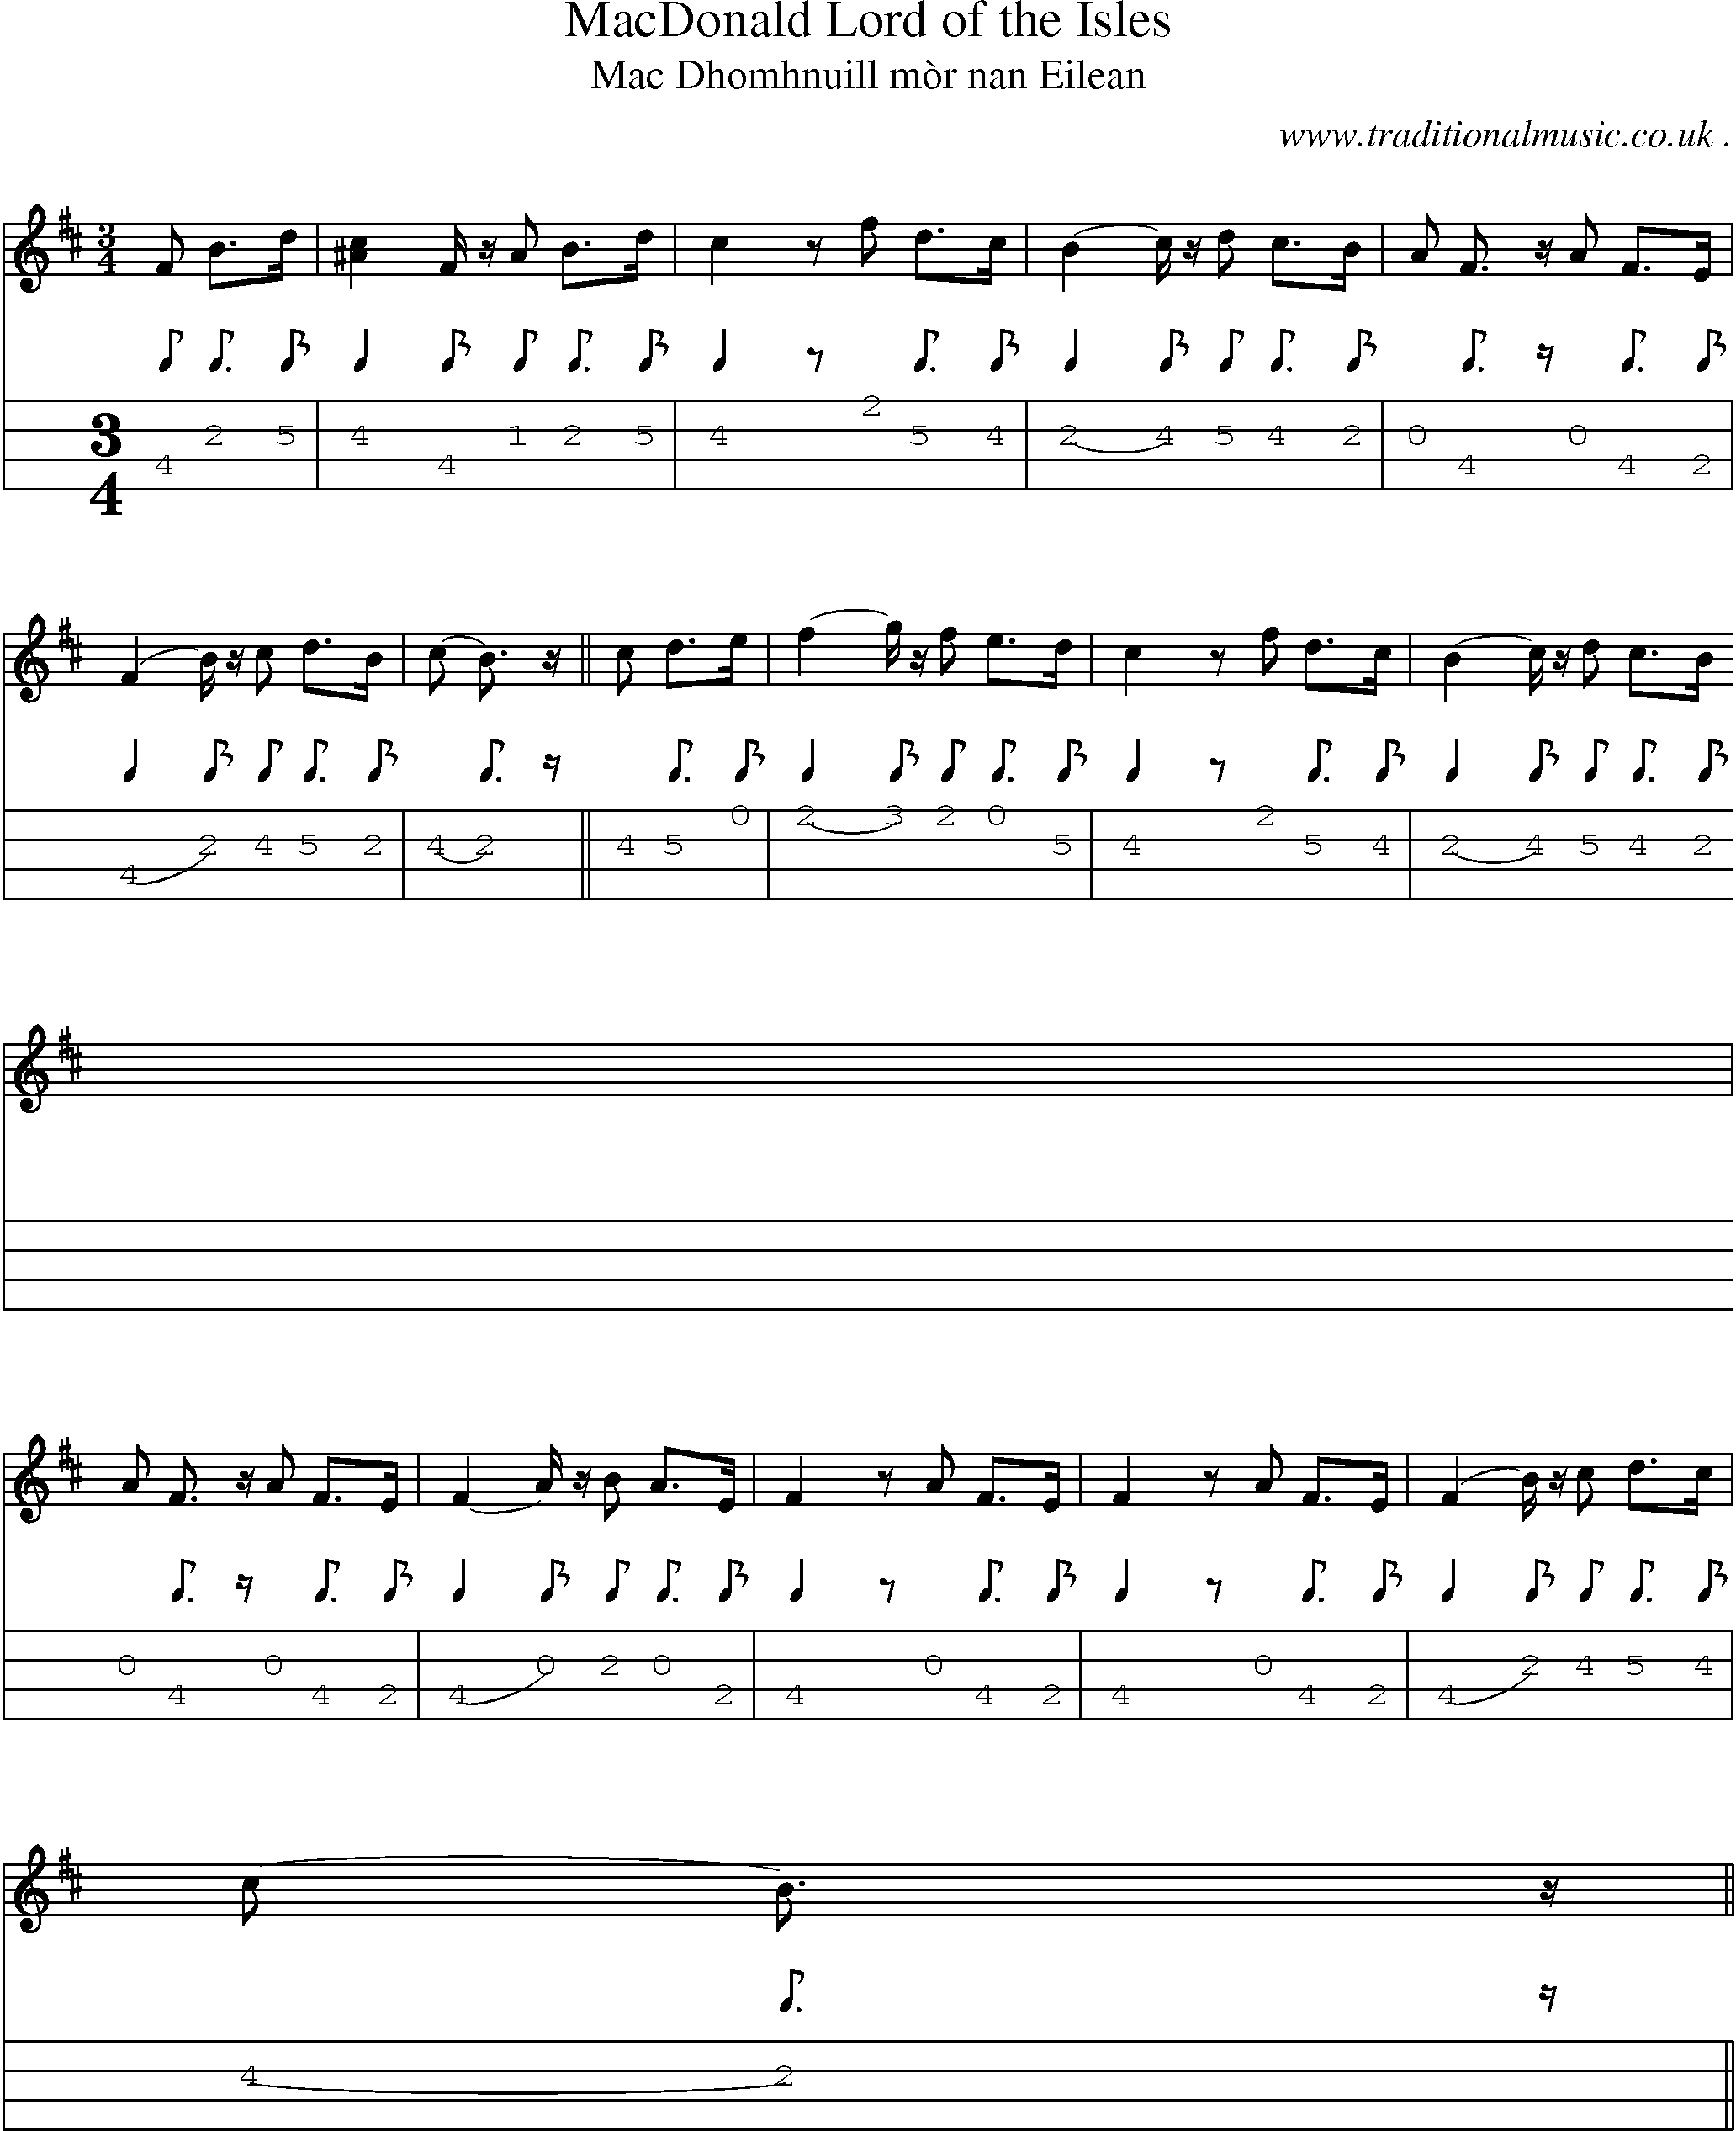 Sheet-music  score, Chords and Mandolin Tabs for Macdonald Lord Of The Isles